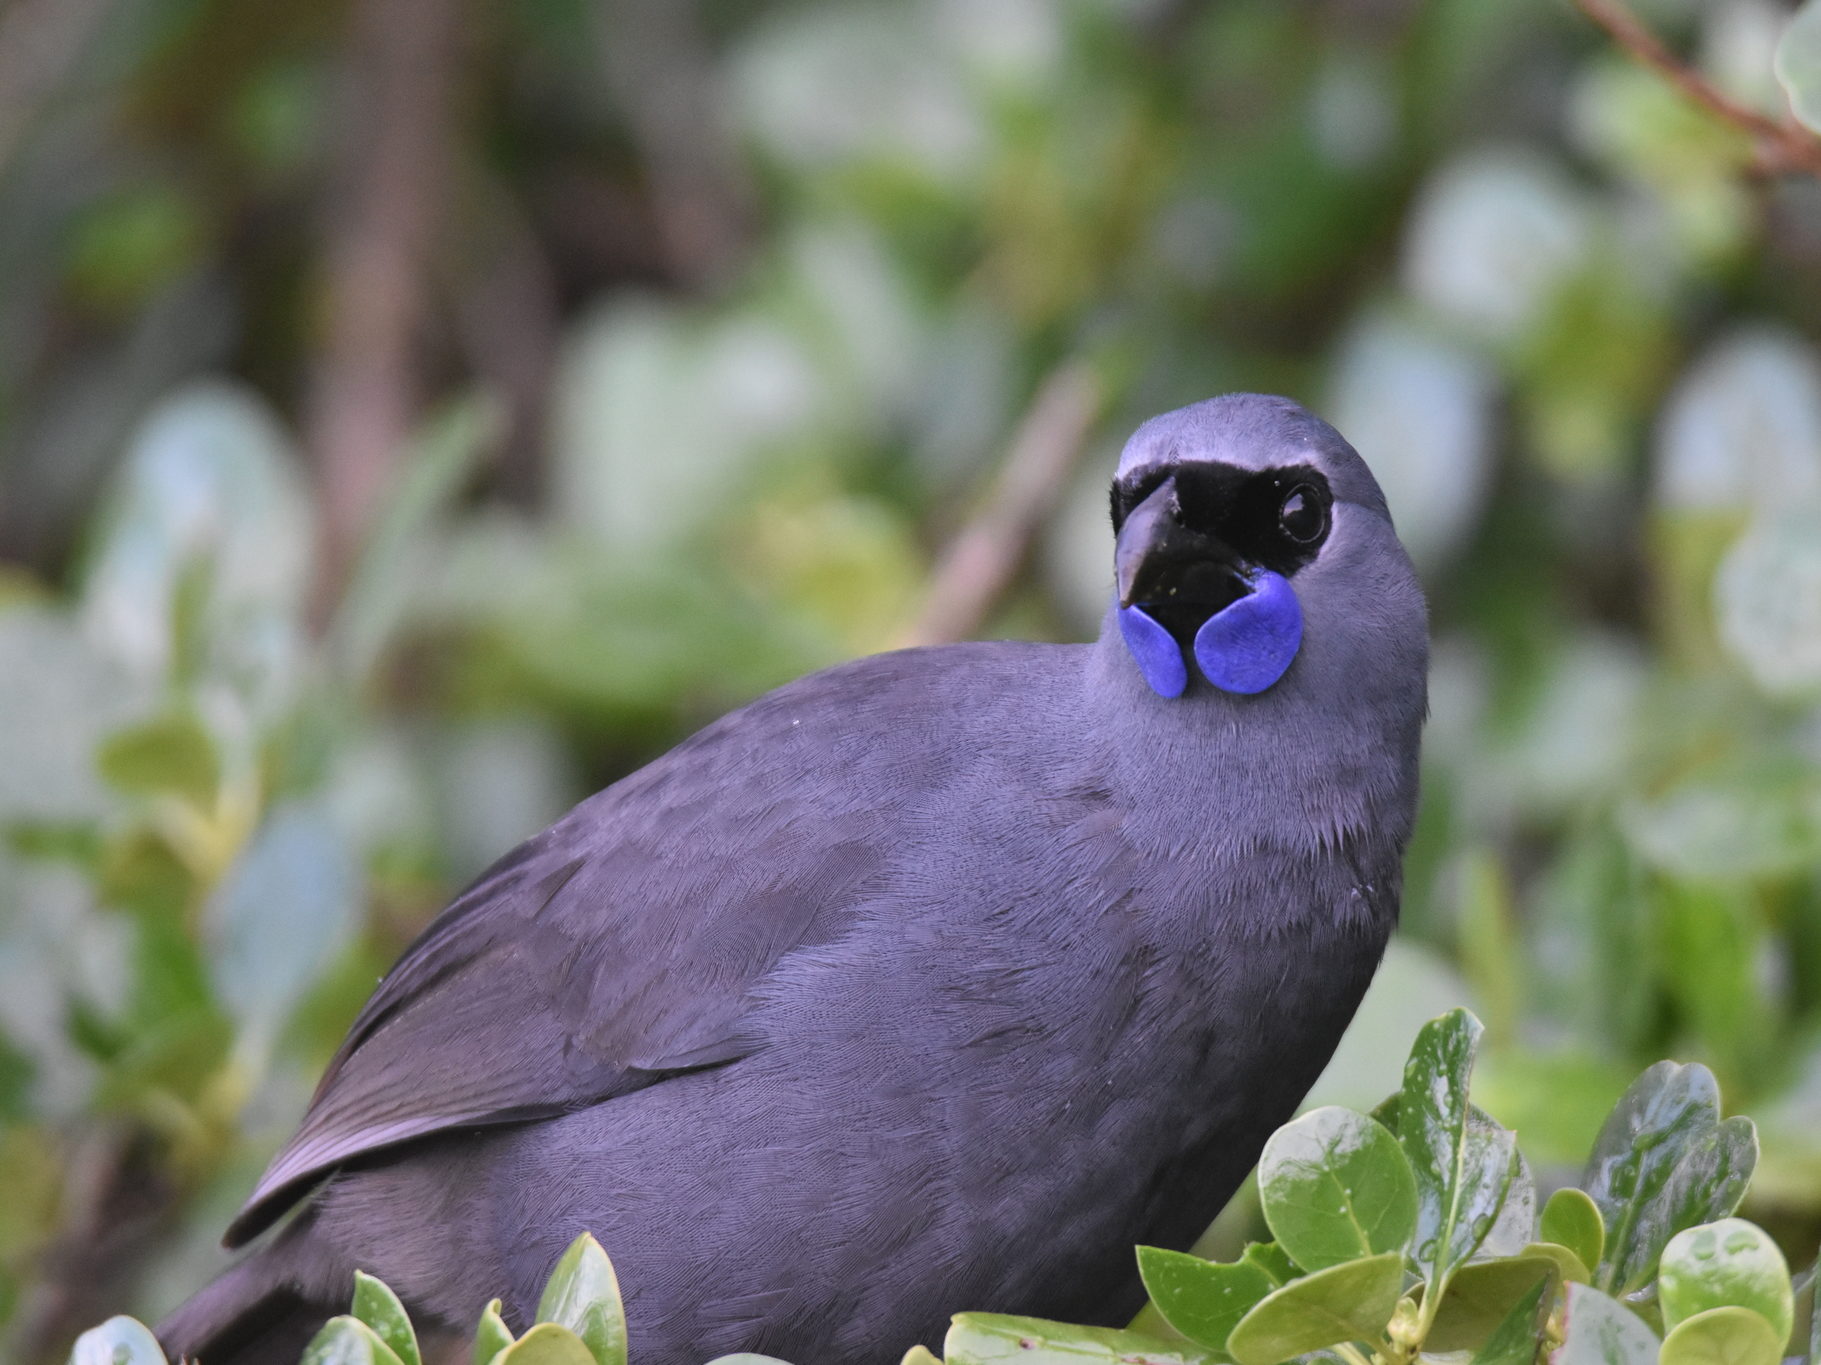 A kōkako perched on a branch.